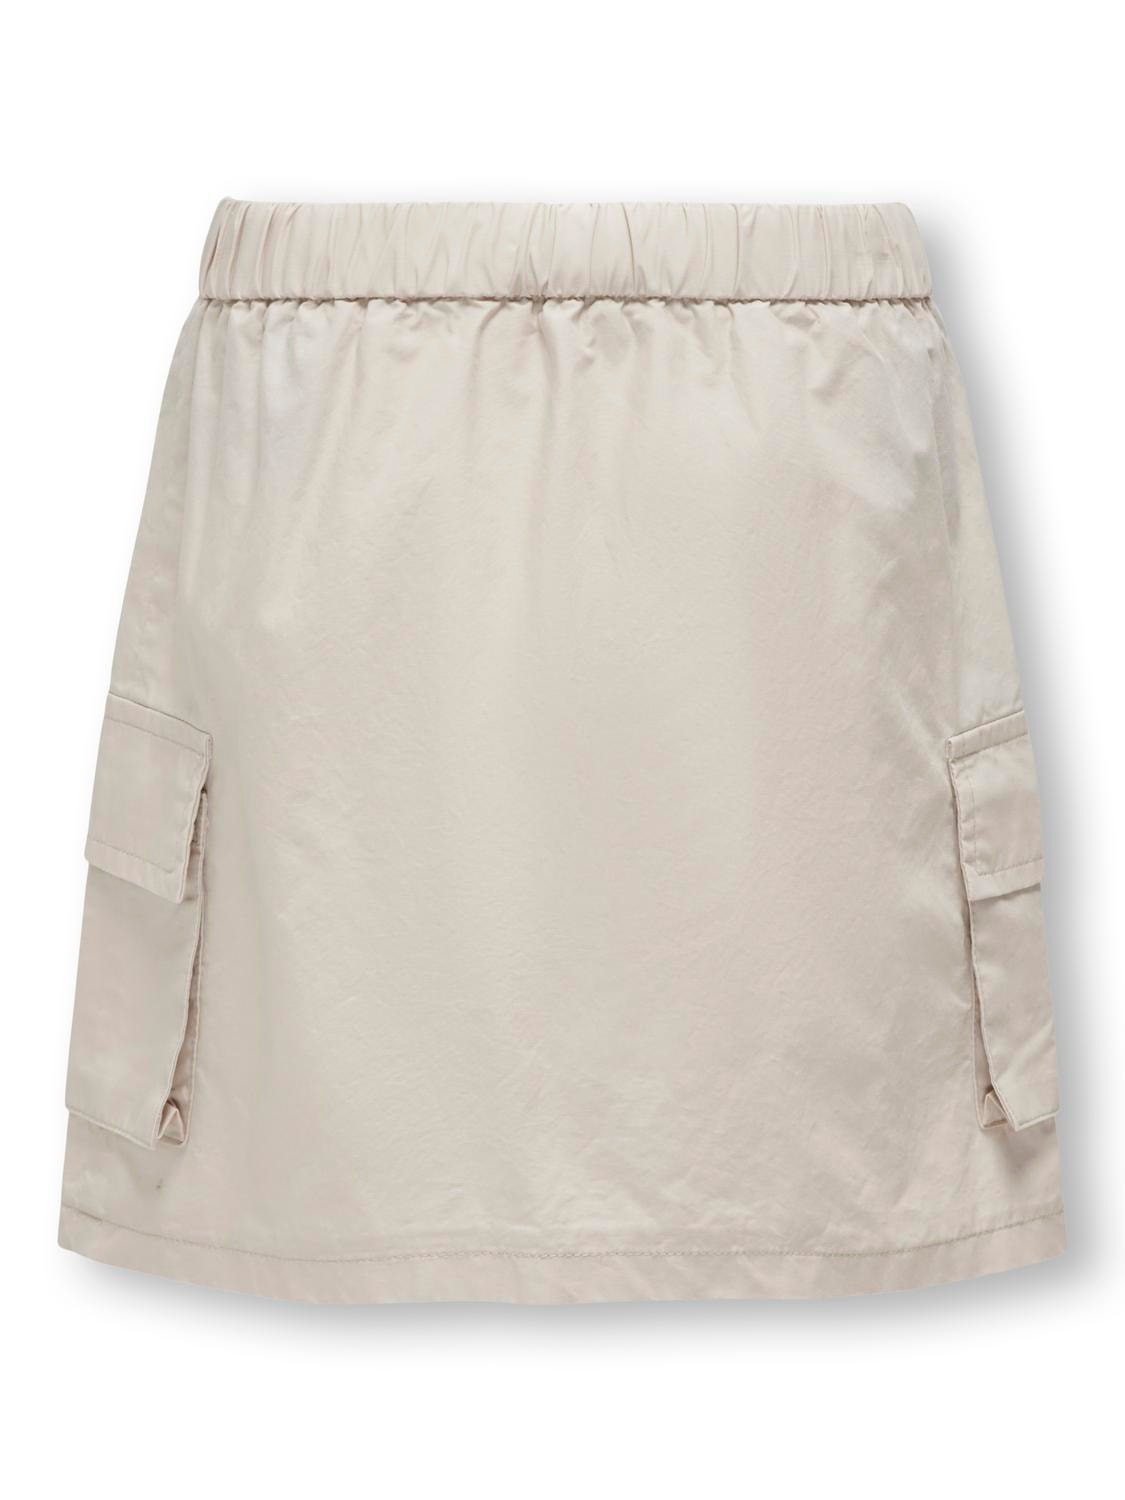 ONLY Short skirt -Pumice Stone - 15316815